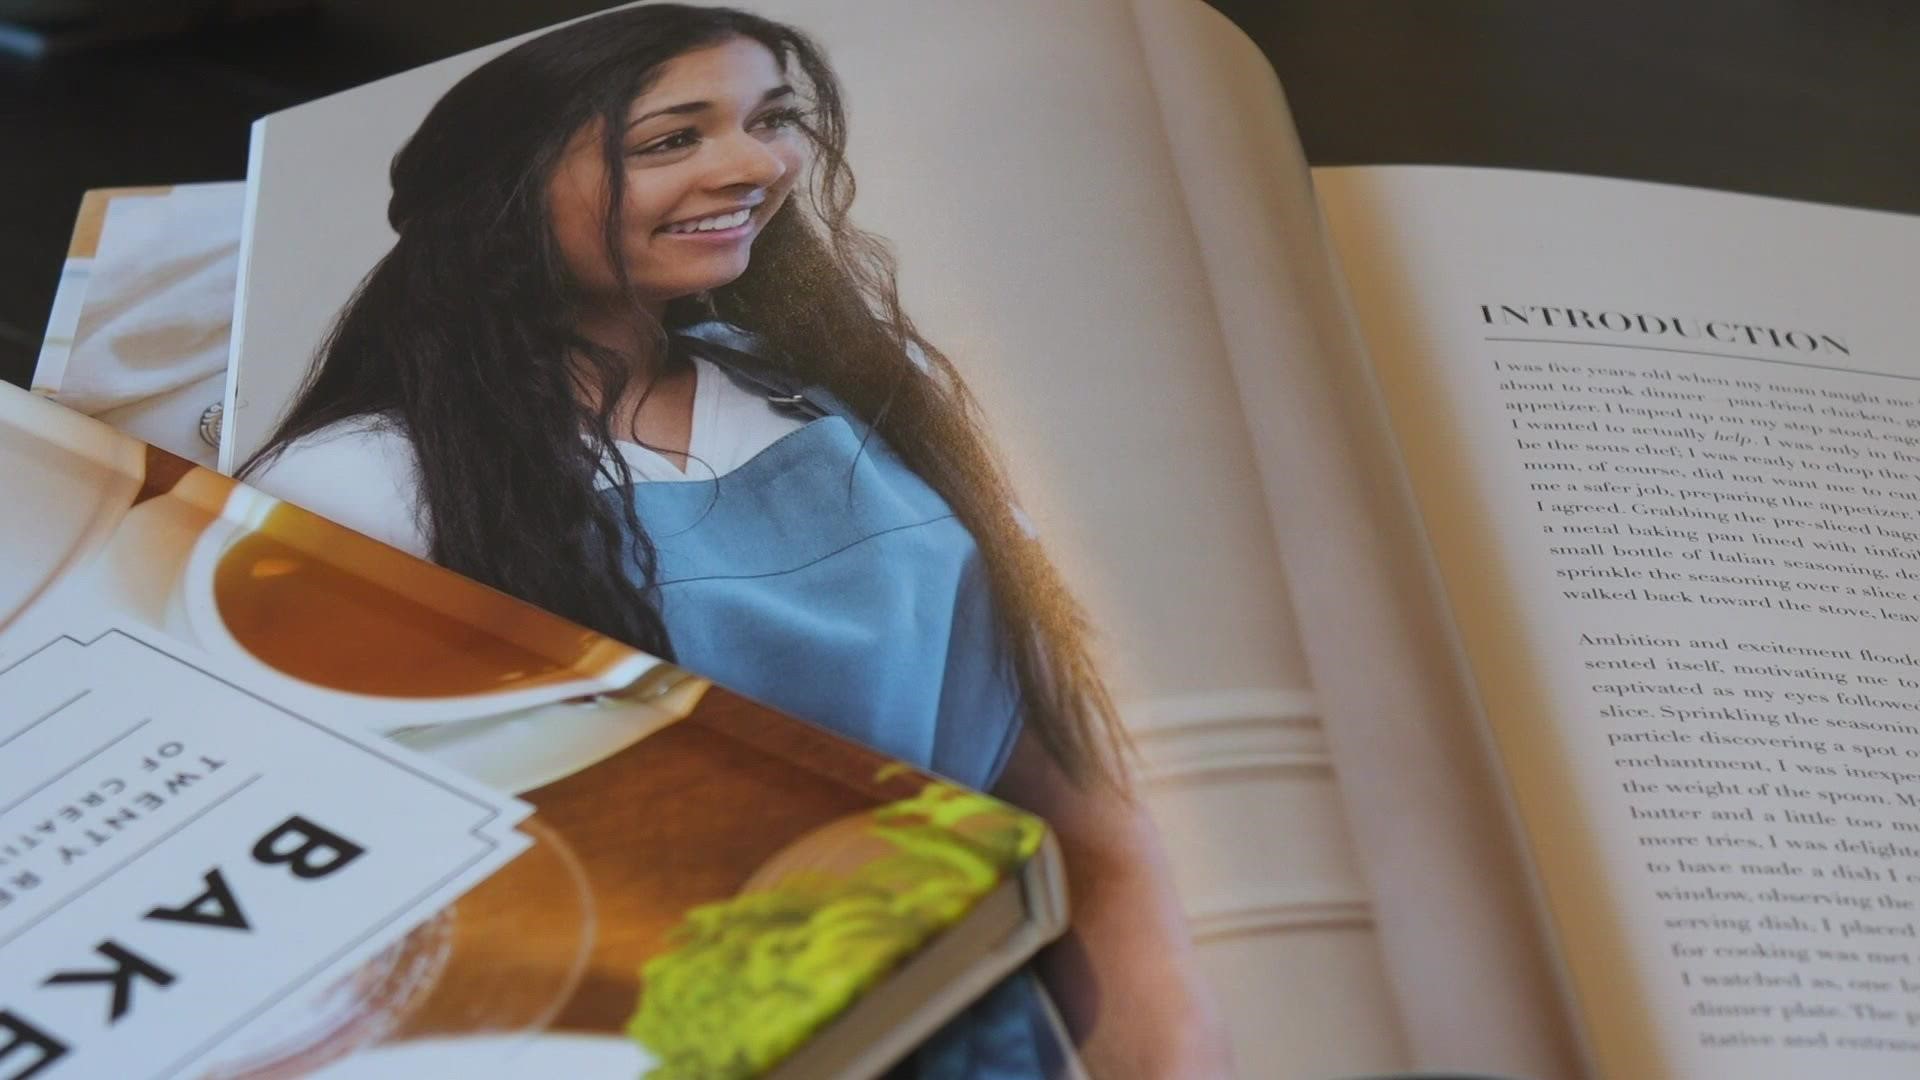 Sahana Vip is a Redmond High School graduate who says she has been cooking her whole life.